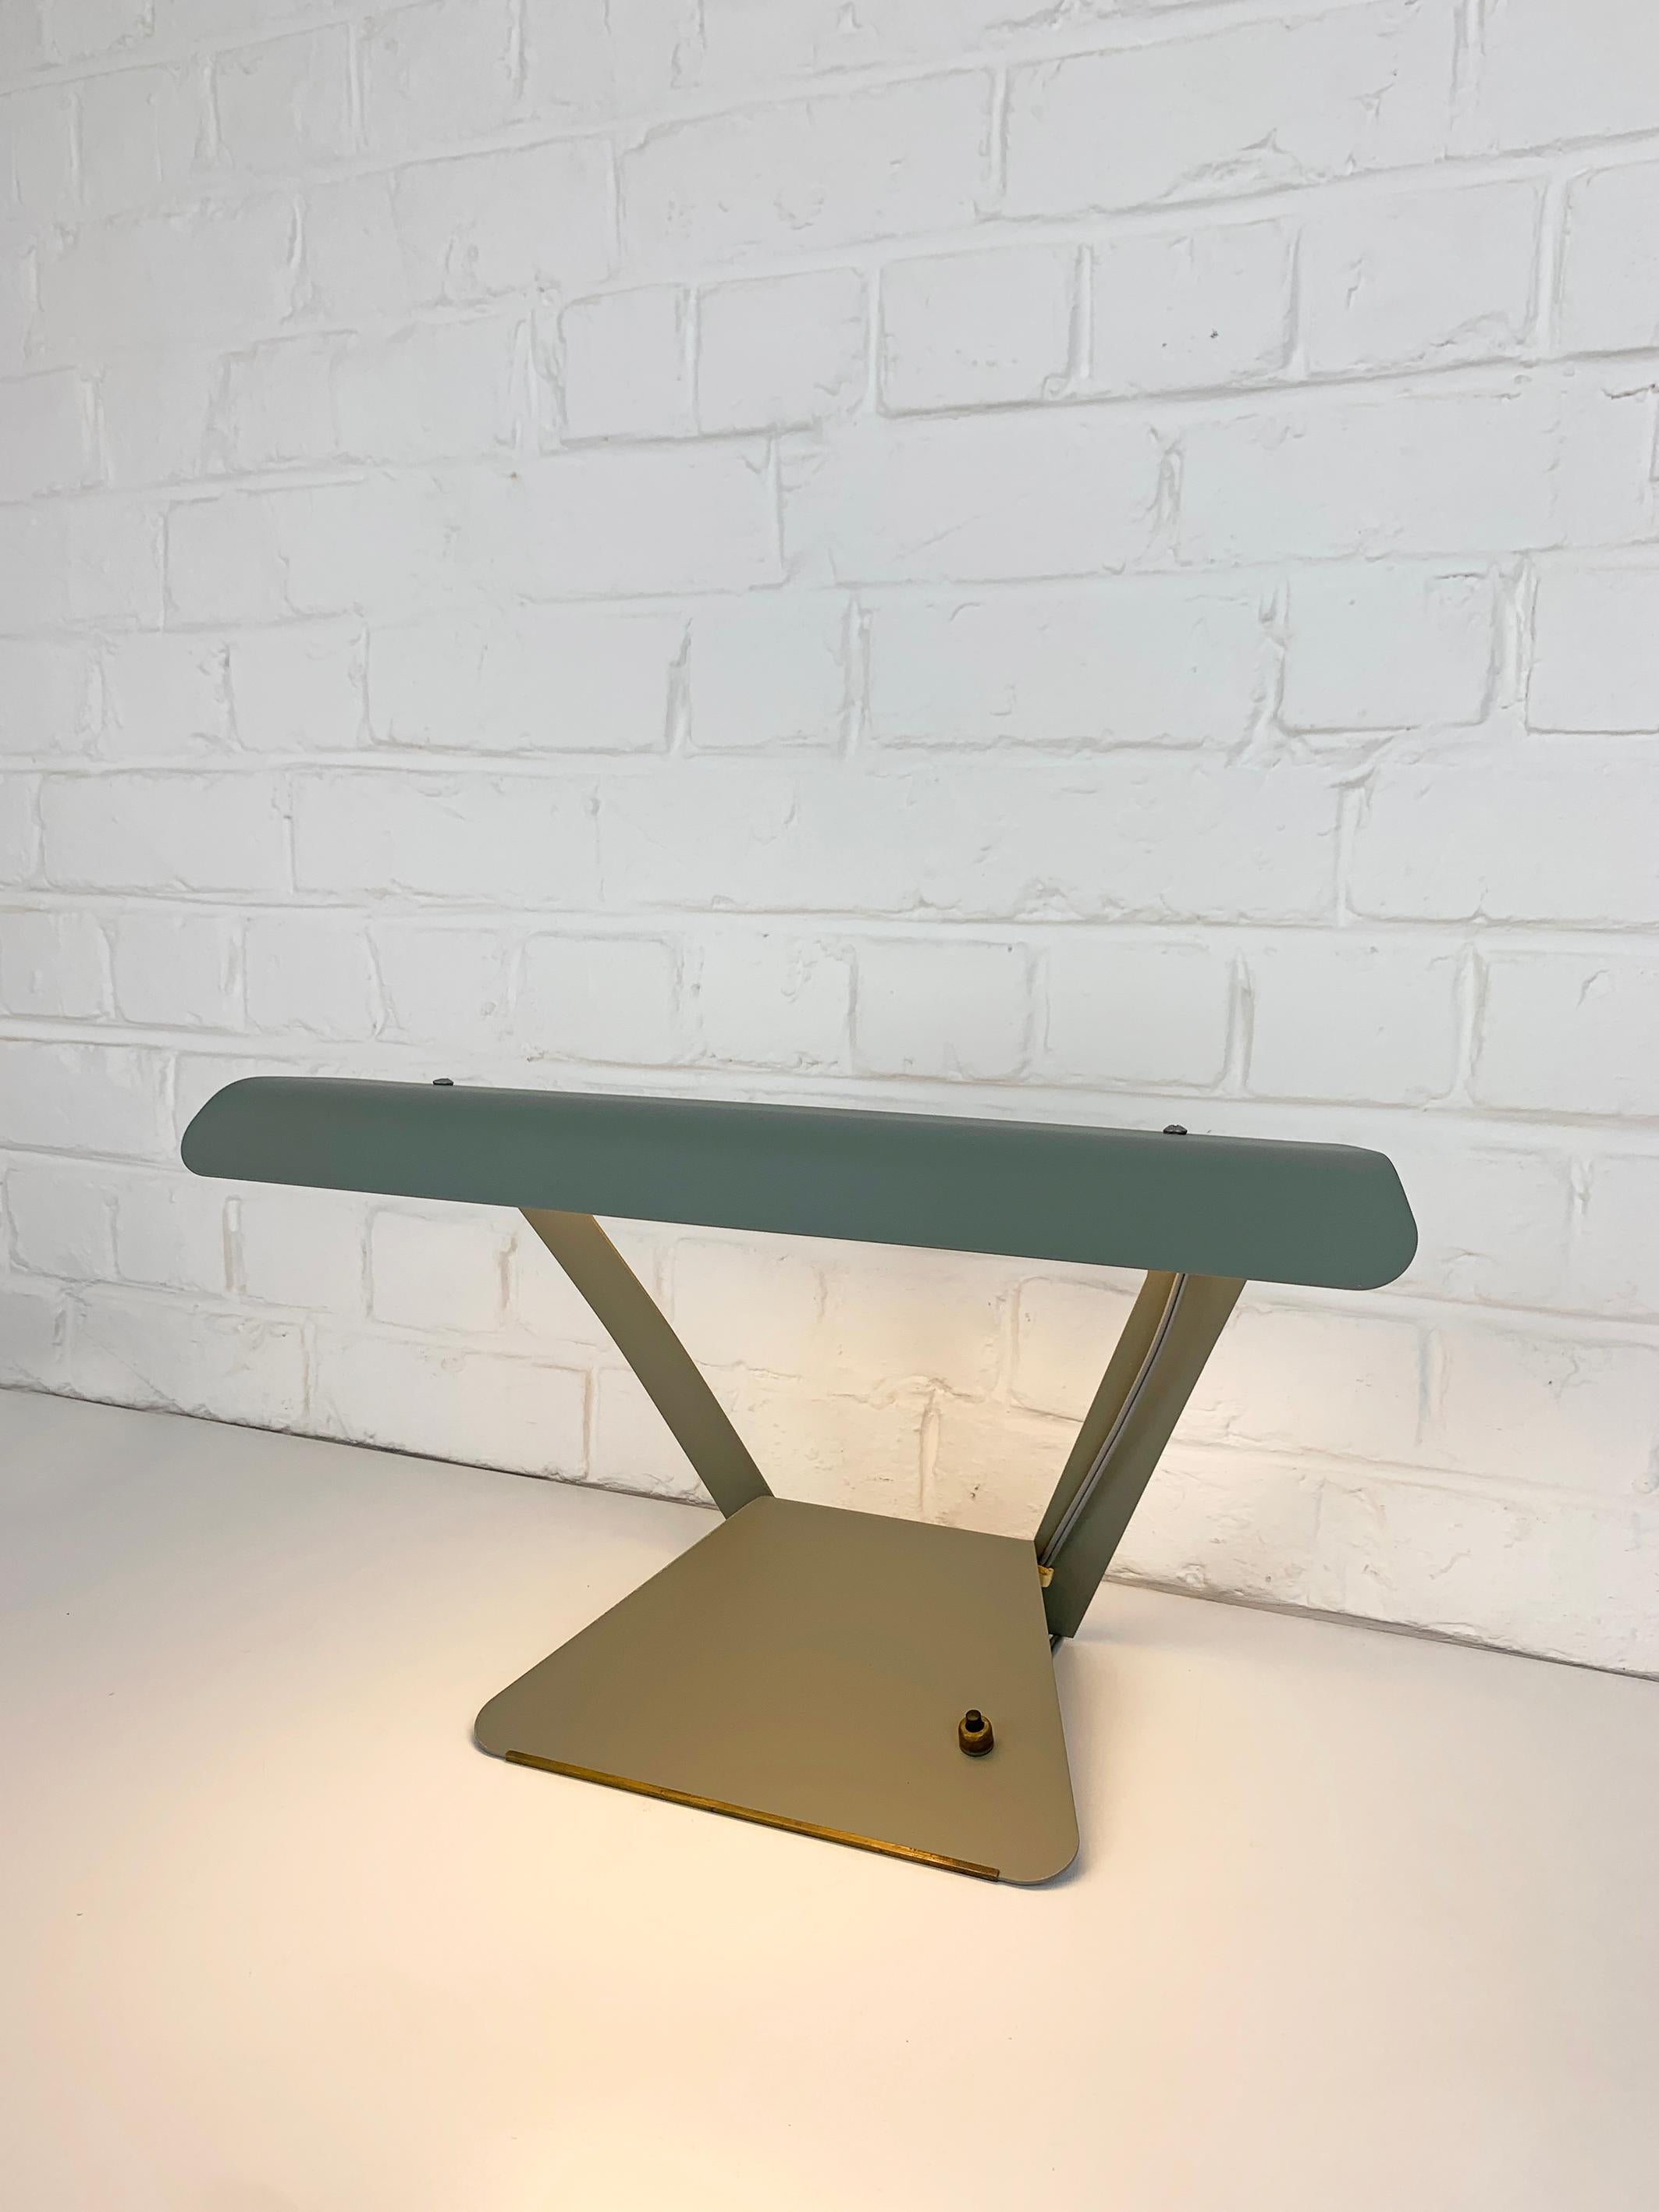 20th Century Mid-Century Modernist Table or DeskLamp by Charlotte Perriand for Philips, 1950s For Sale